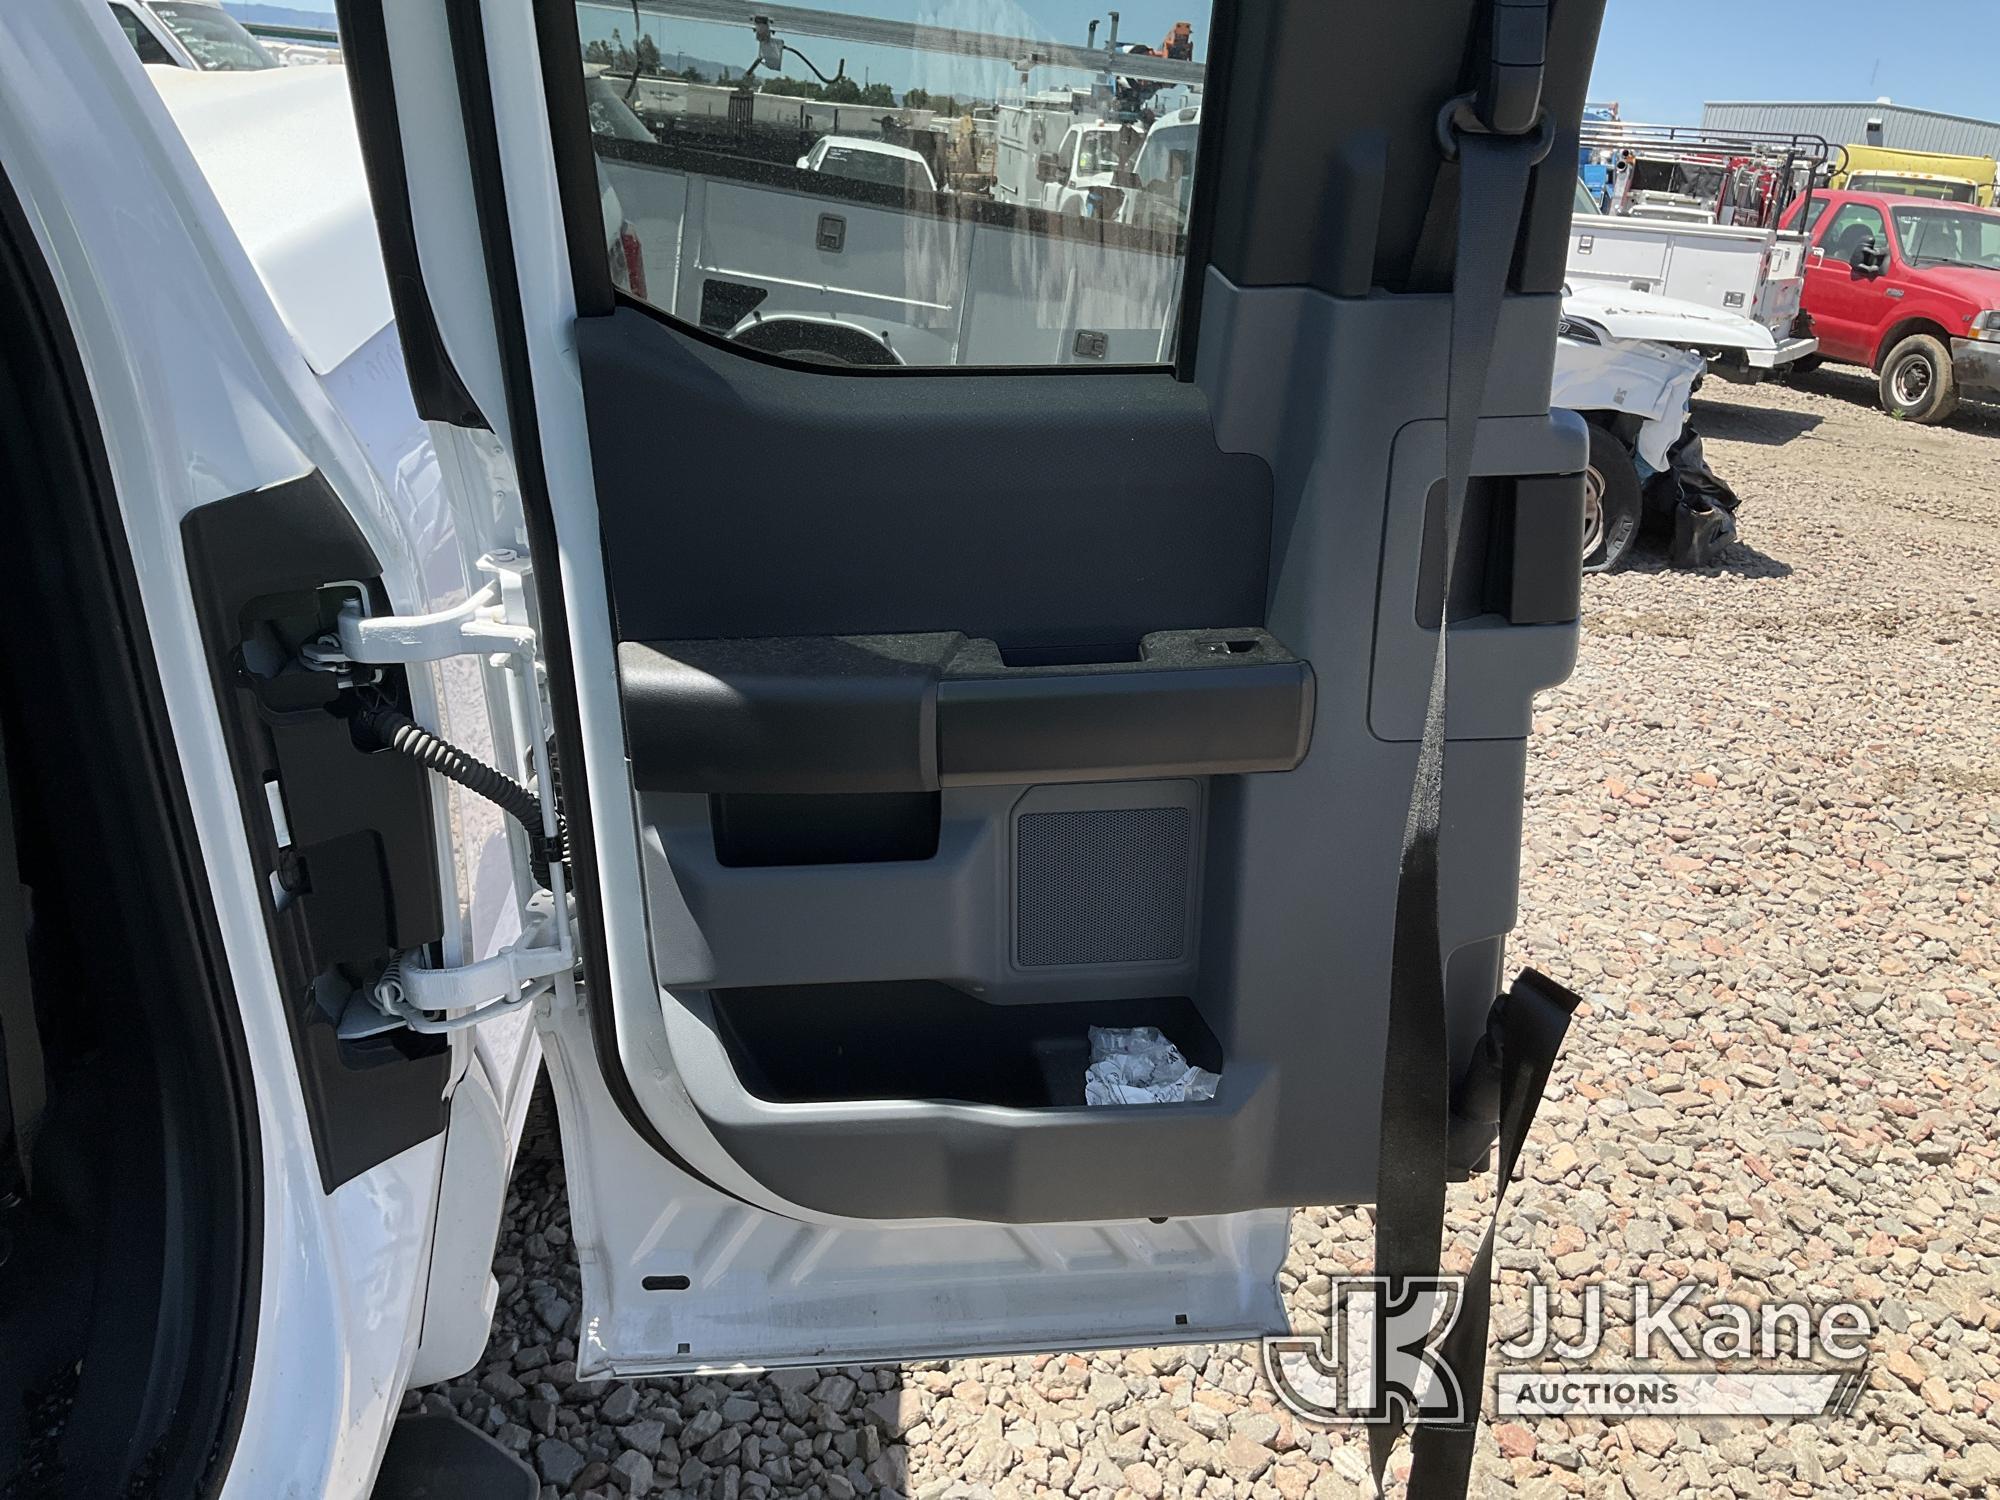 (Dixon, CA) 2021 Ford F150 4x4 Extended-Cab Pickup Truck Not Running. Wrecked. Airbags Deployed.